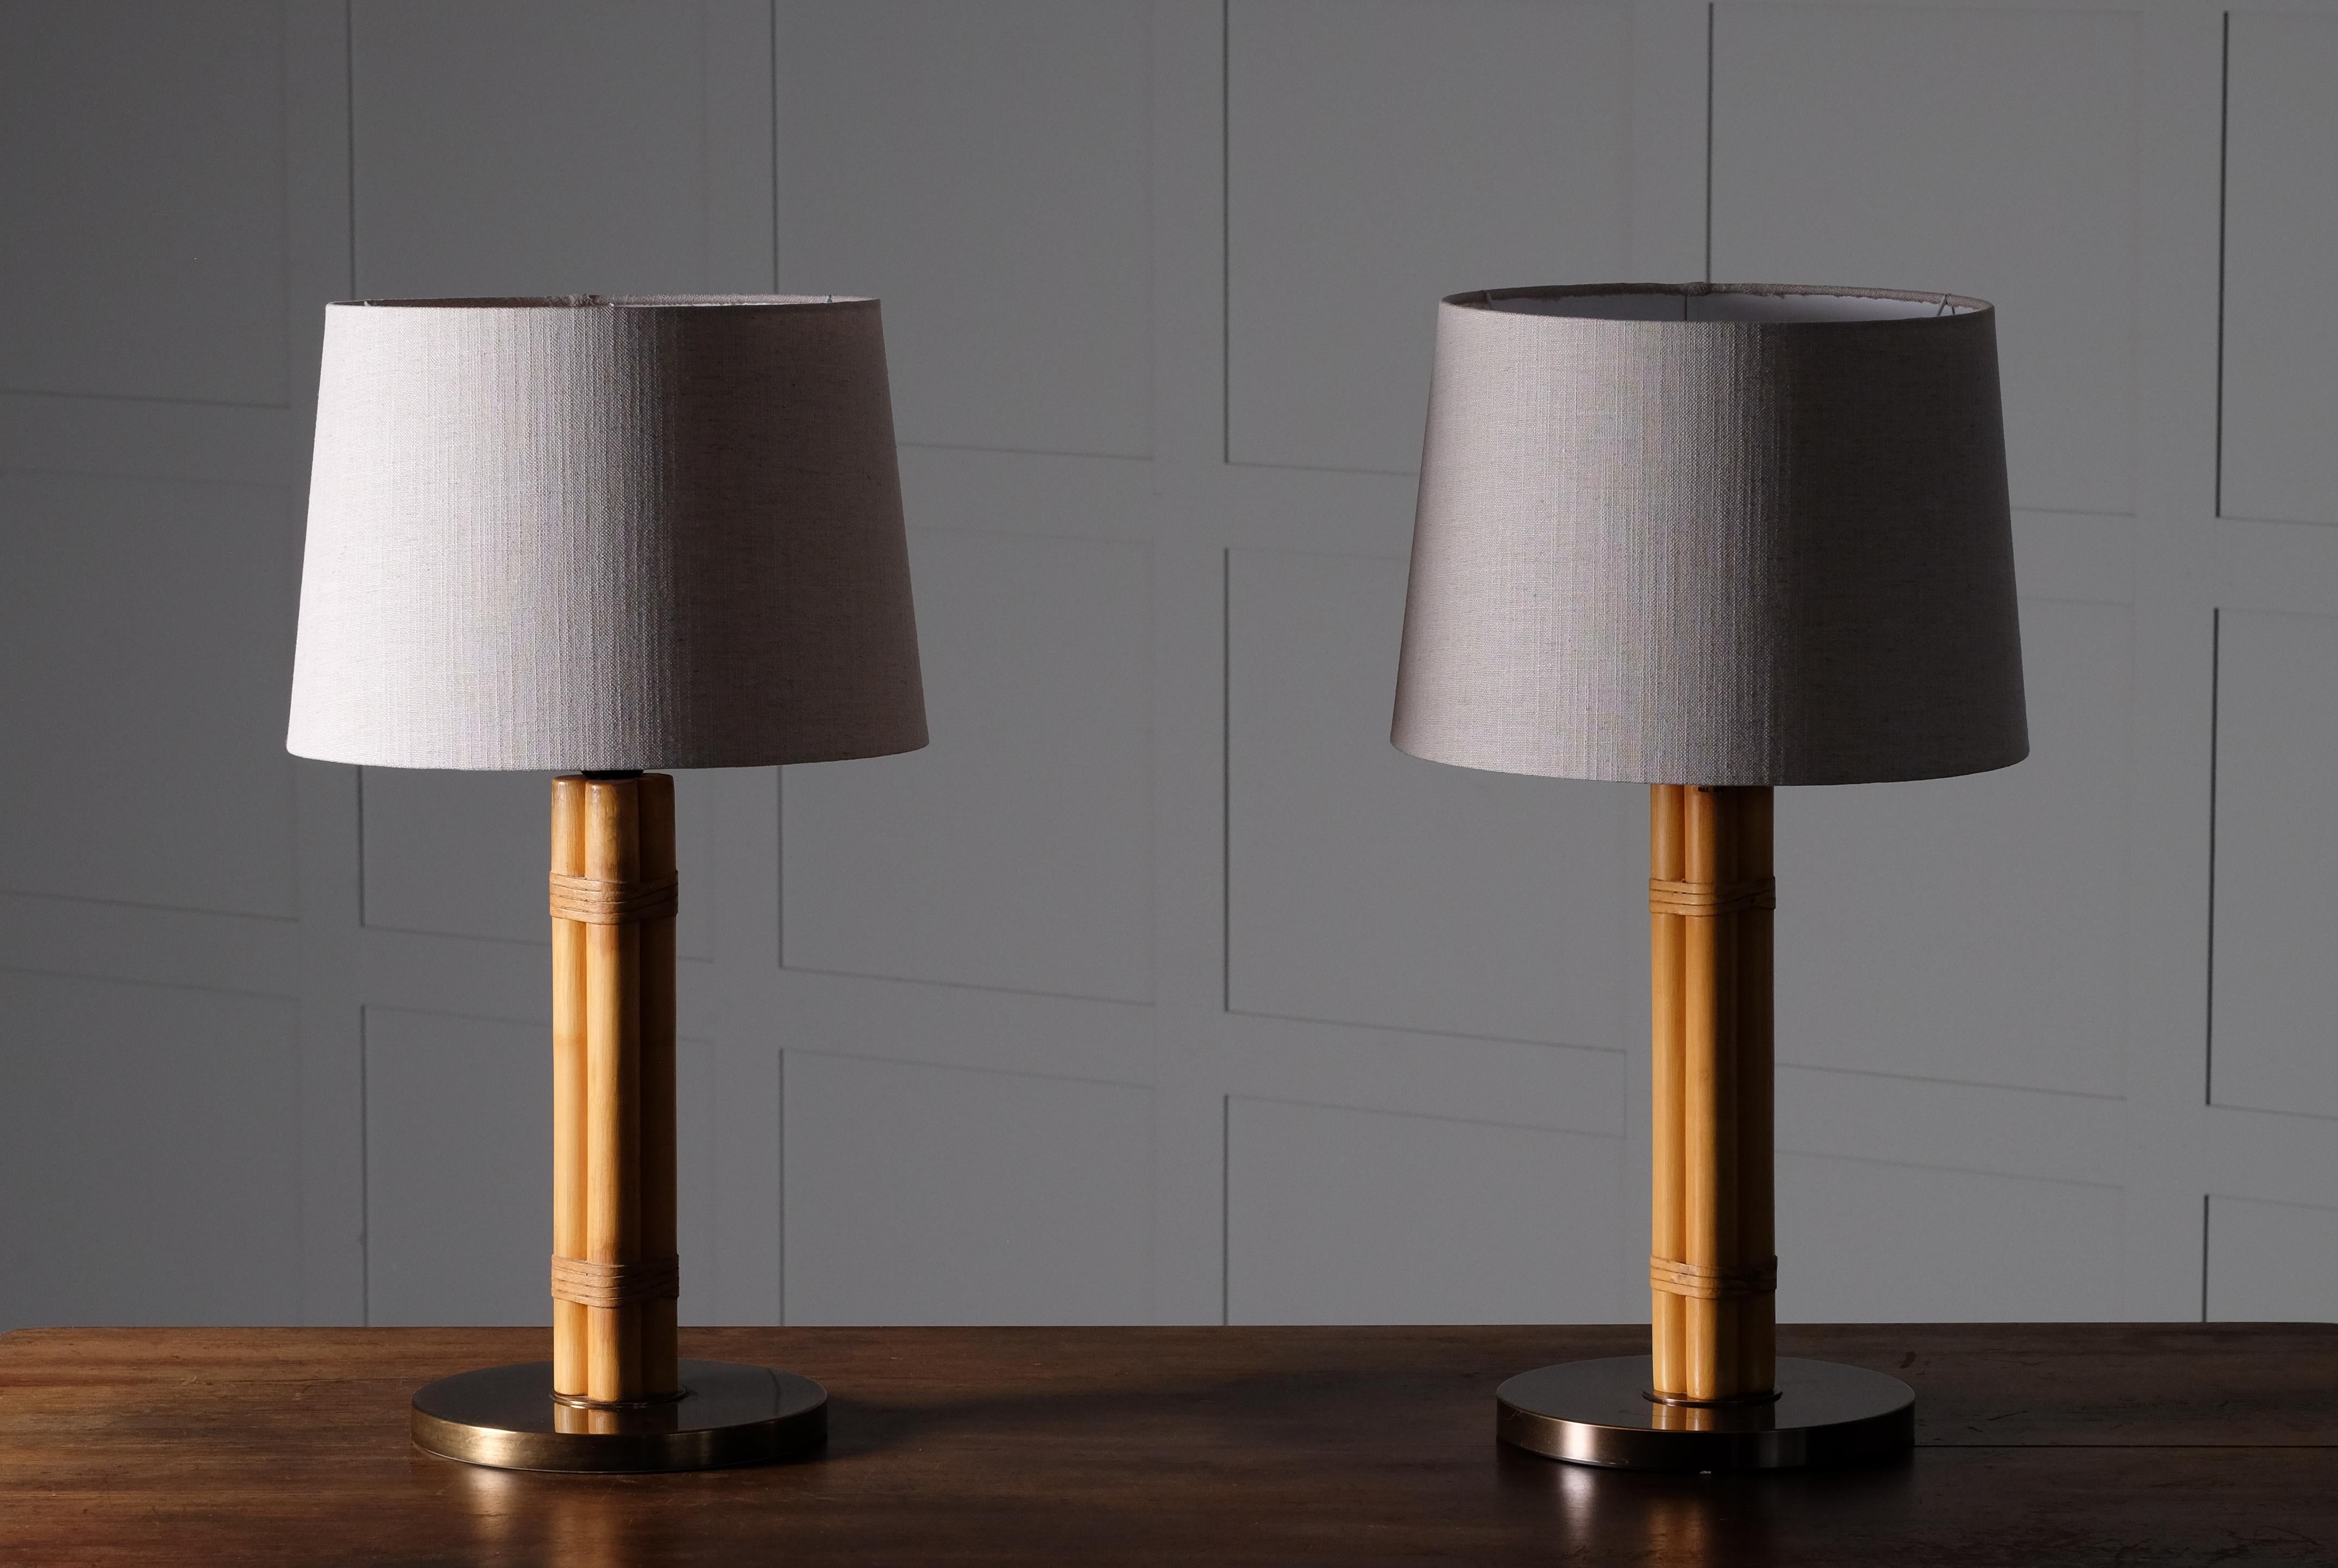 Pair of Hans-Agne Jakobsson Brass & Bamboo Table Lamps, 1970s For Sale 4